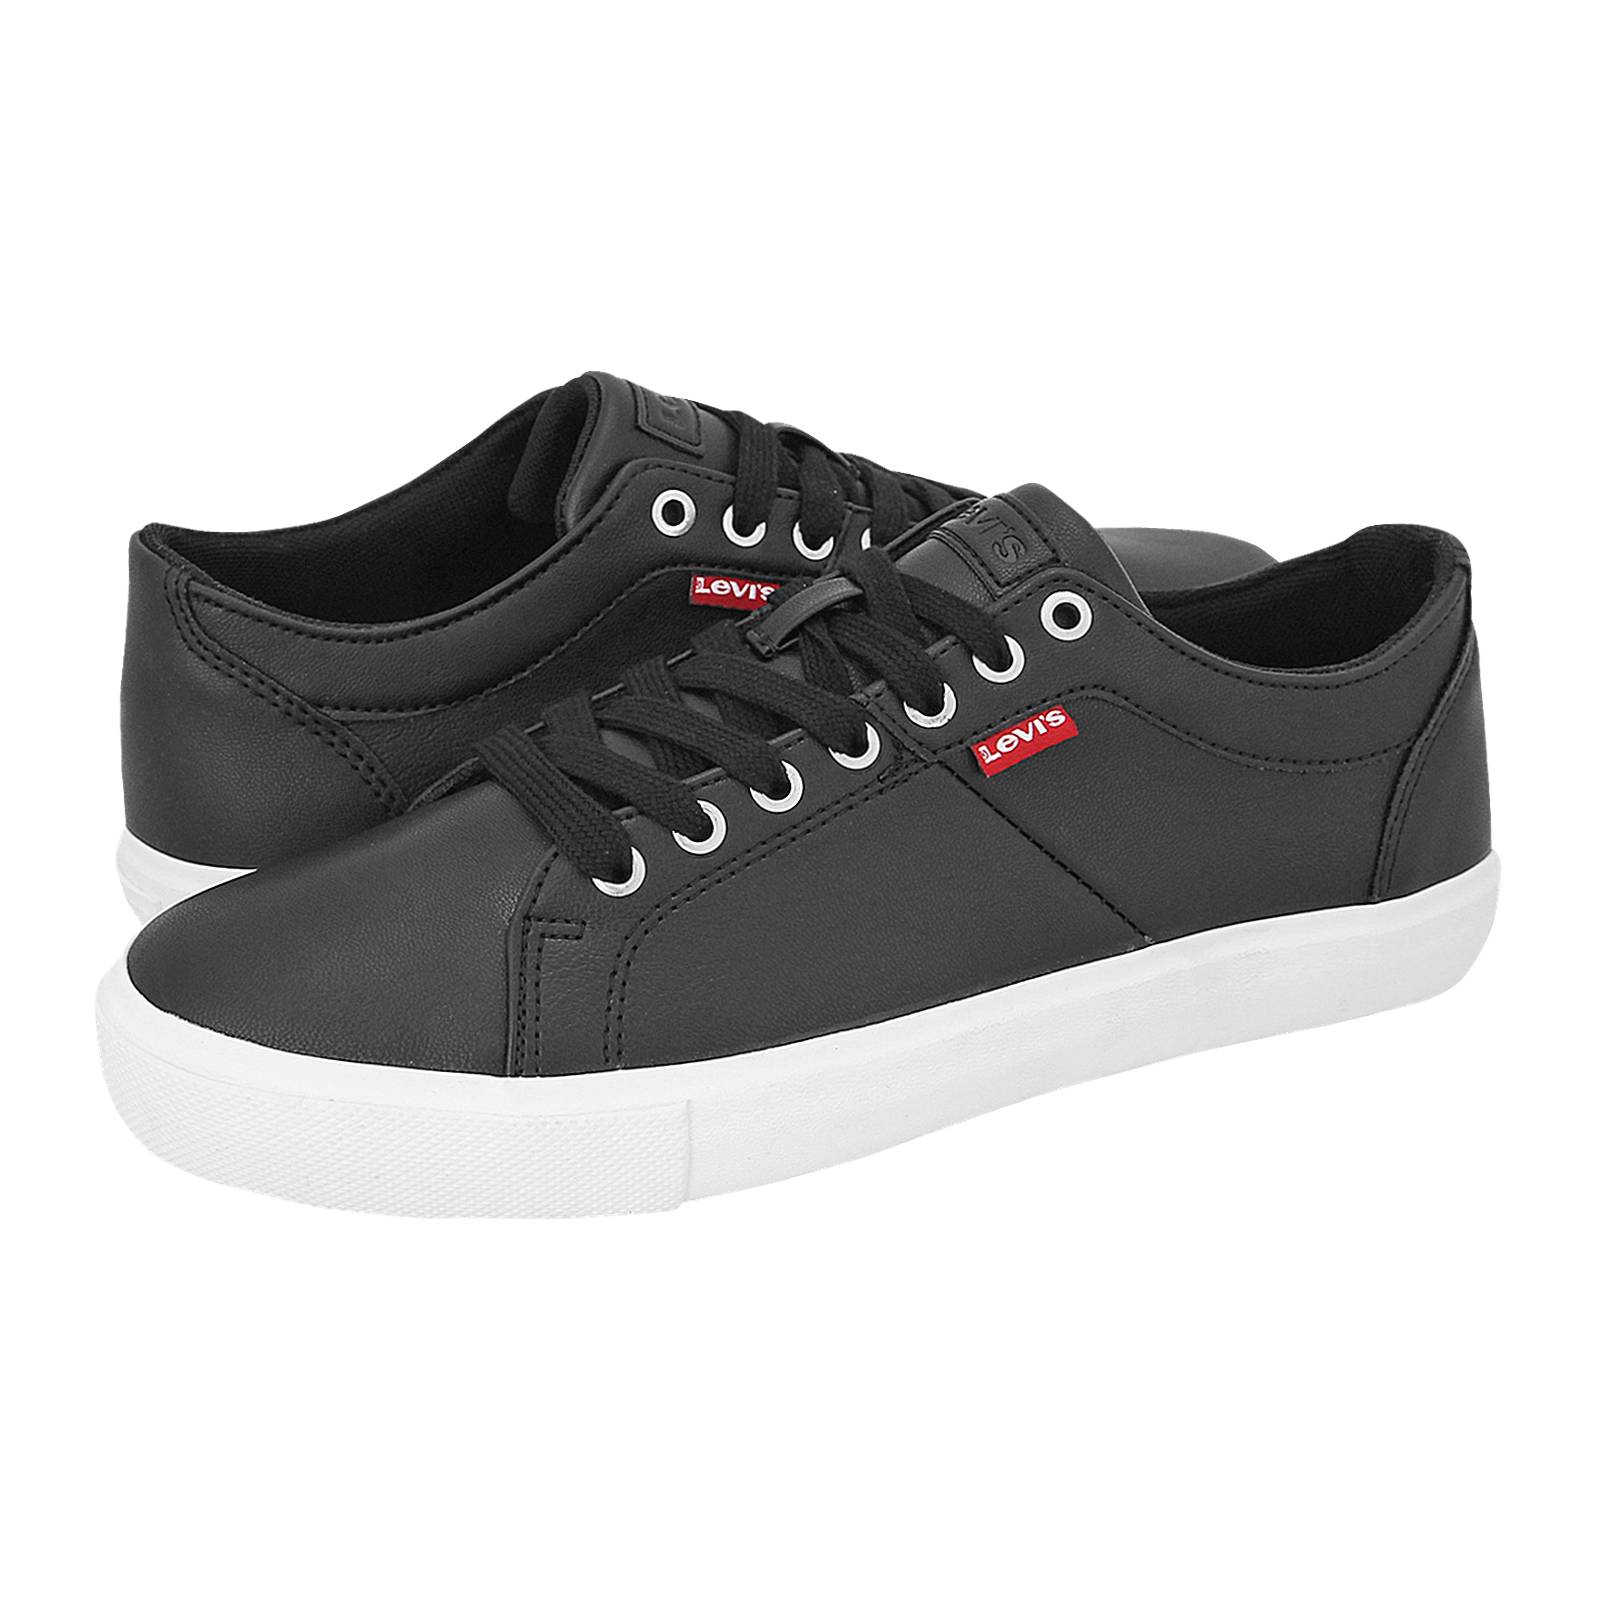 Woodward - Levi's Men's casual shoes made of synthetic leather - Gianna  Kazakou Online